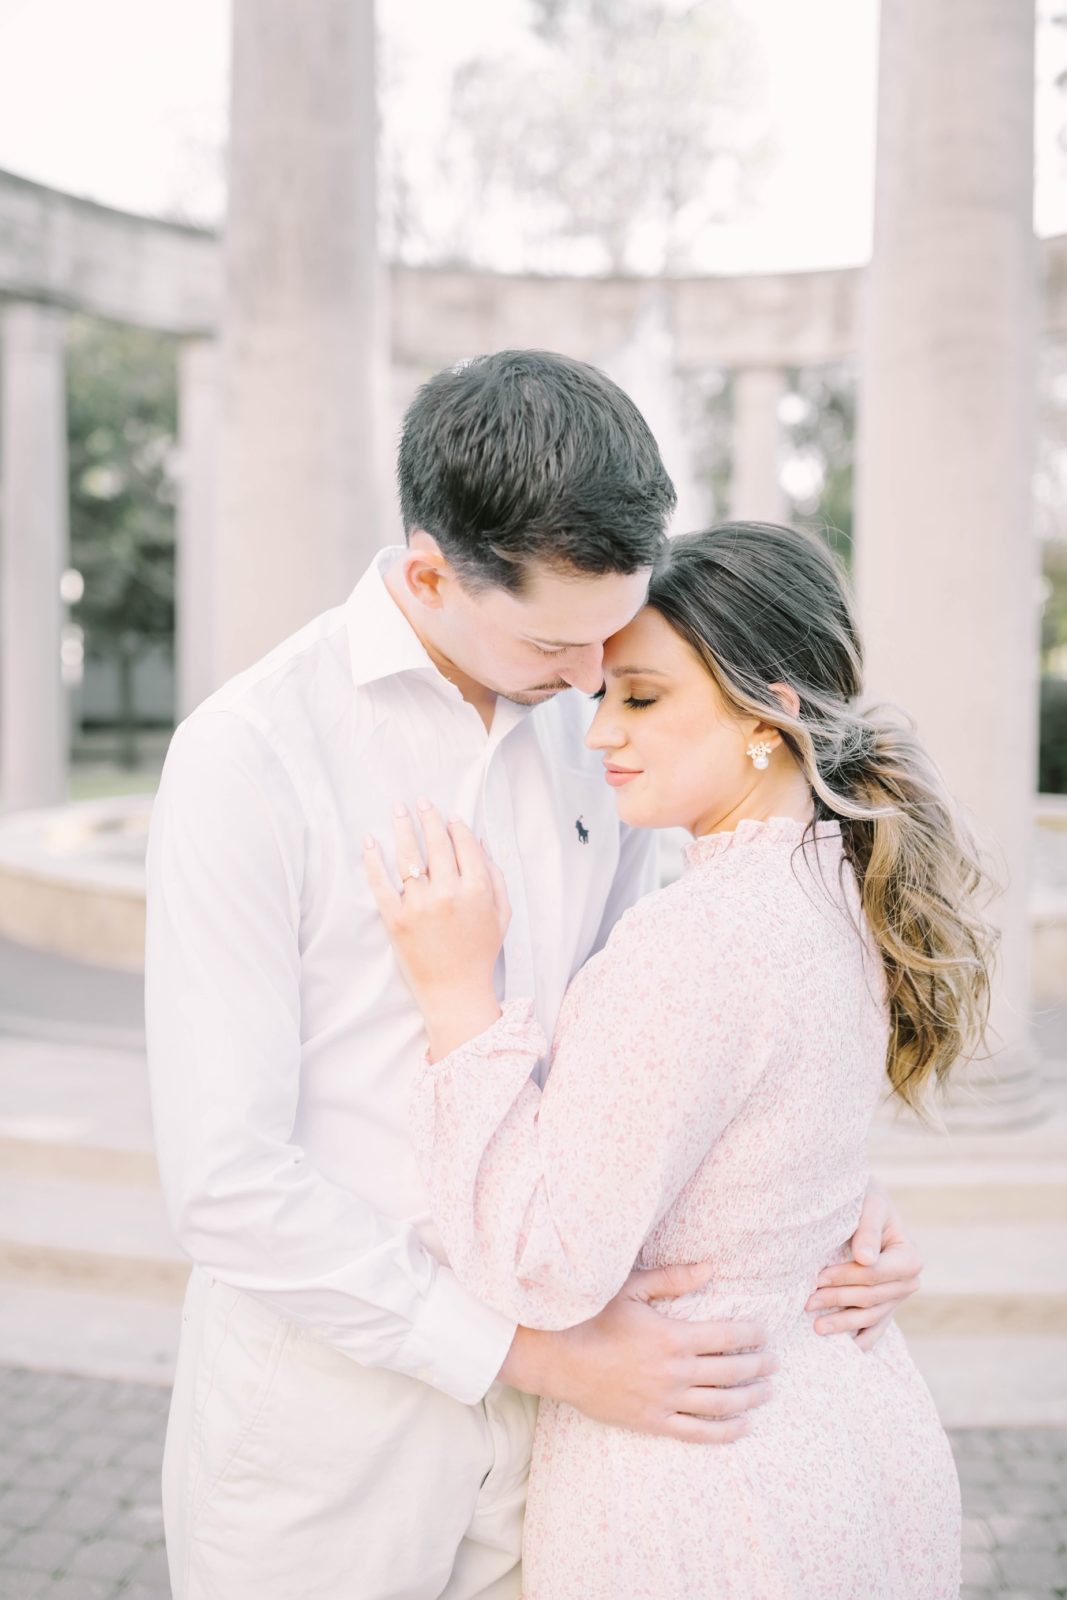 A woman wearing pearls snuggles into her fiance by Christina Elliott Photography. eyes closed snuggling portrait #christinaelliottphotography #Houstonengagements #riceuniversity #springengagements #sayIdo #Houstonengagementphotographers